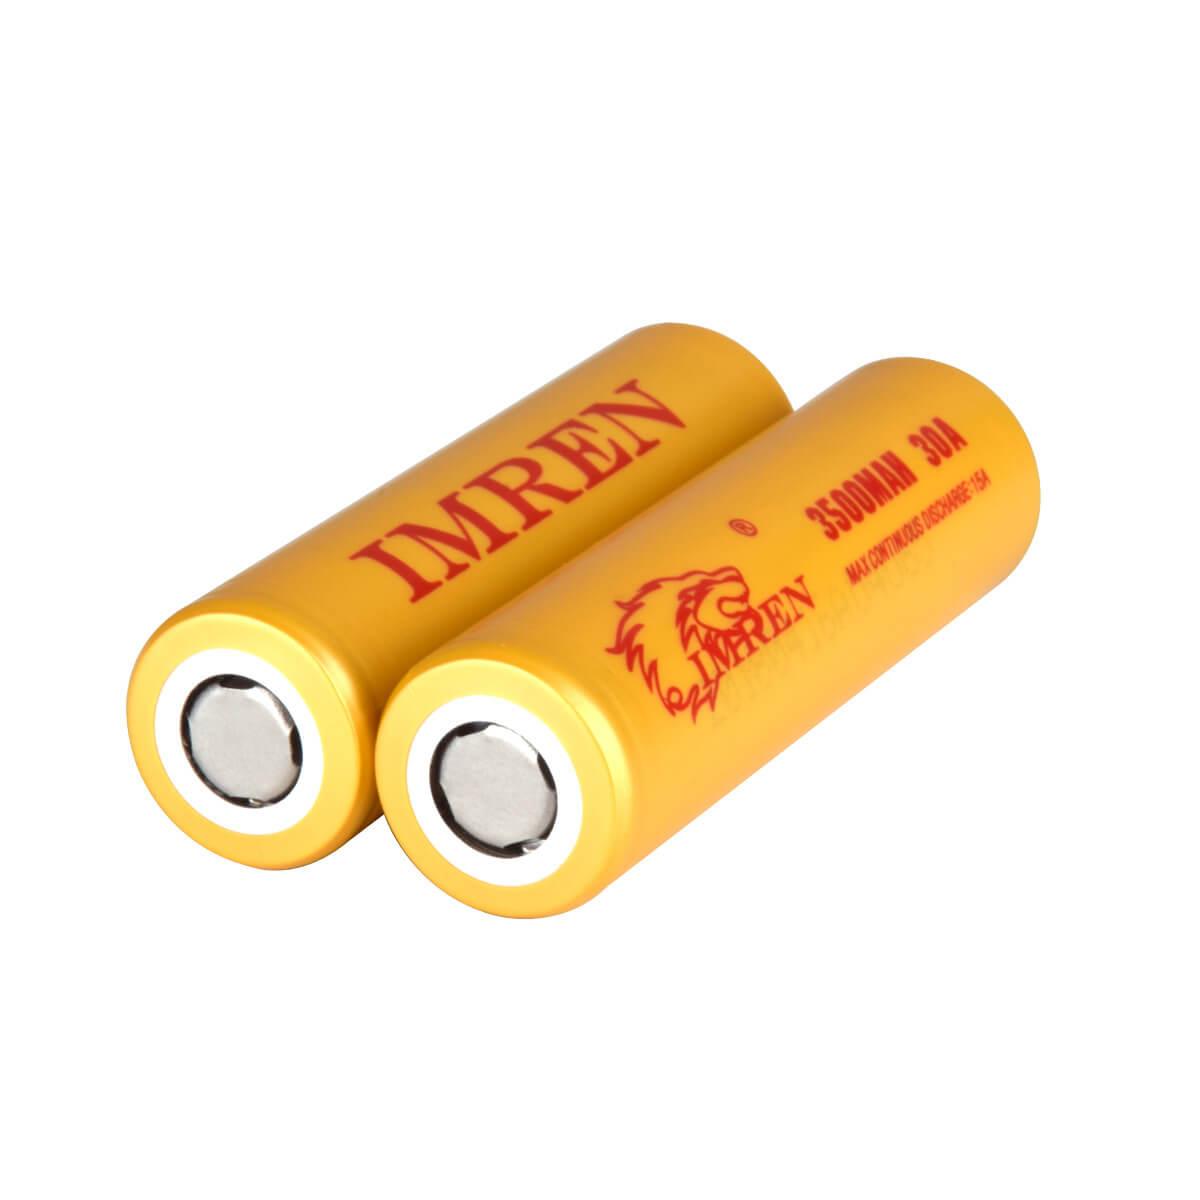 IMREN Battery Official Store Lithium-ion Rechargeable The of Choice - Best Battery